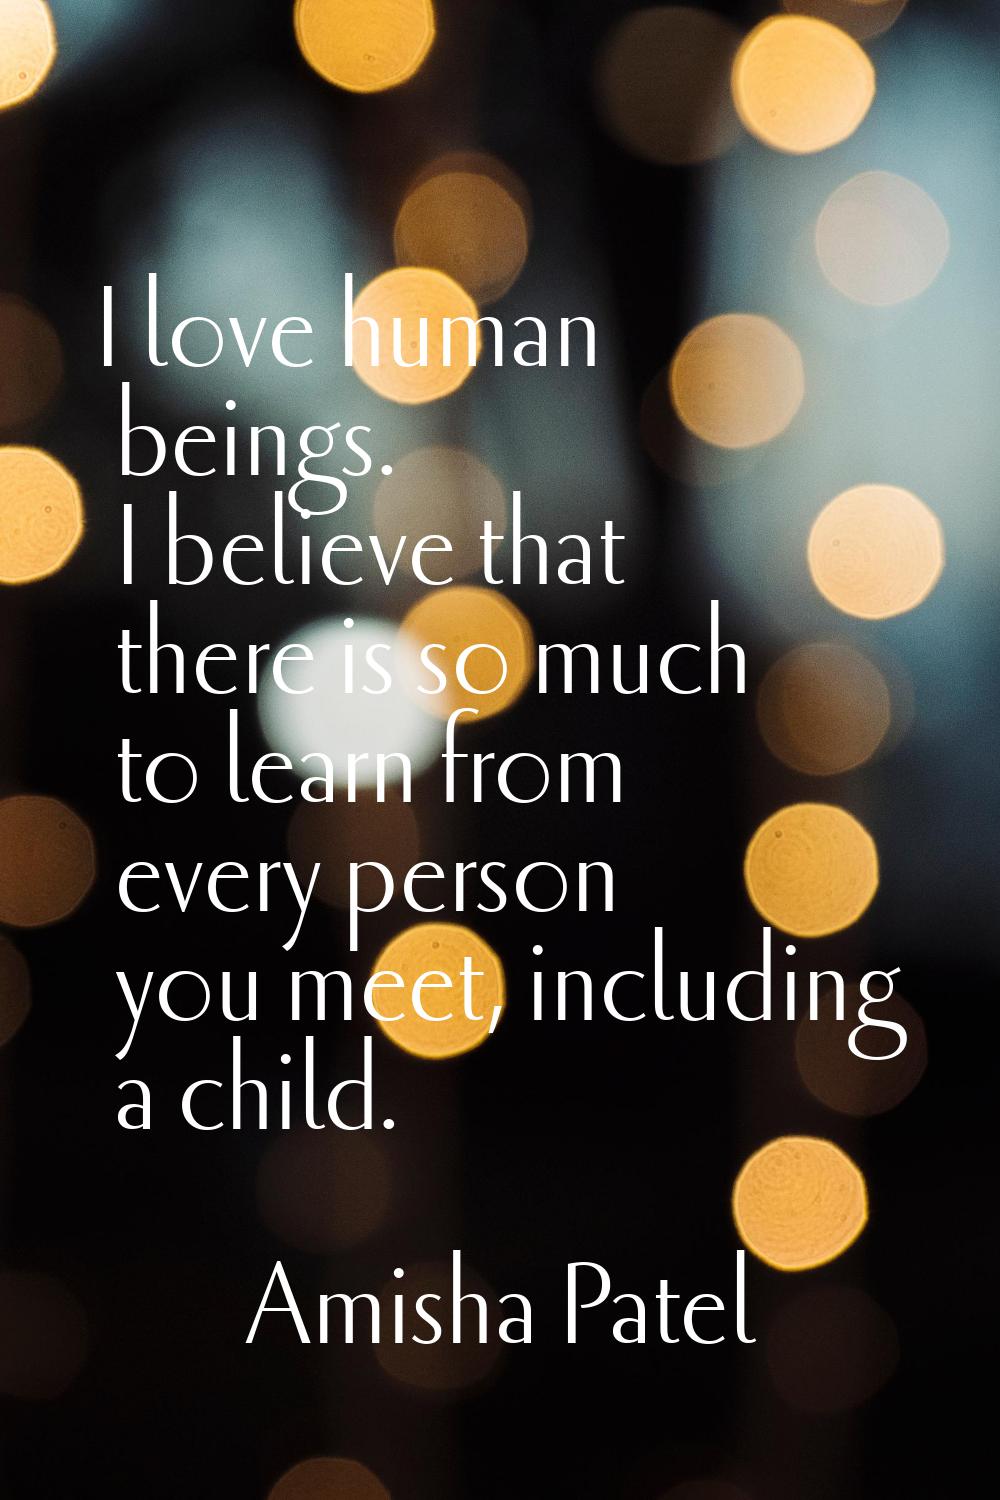 I love human beings. I believe that there is so much to learn from every person you meet, including